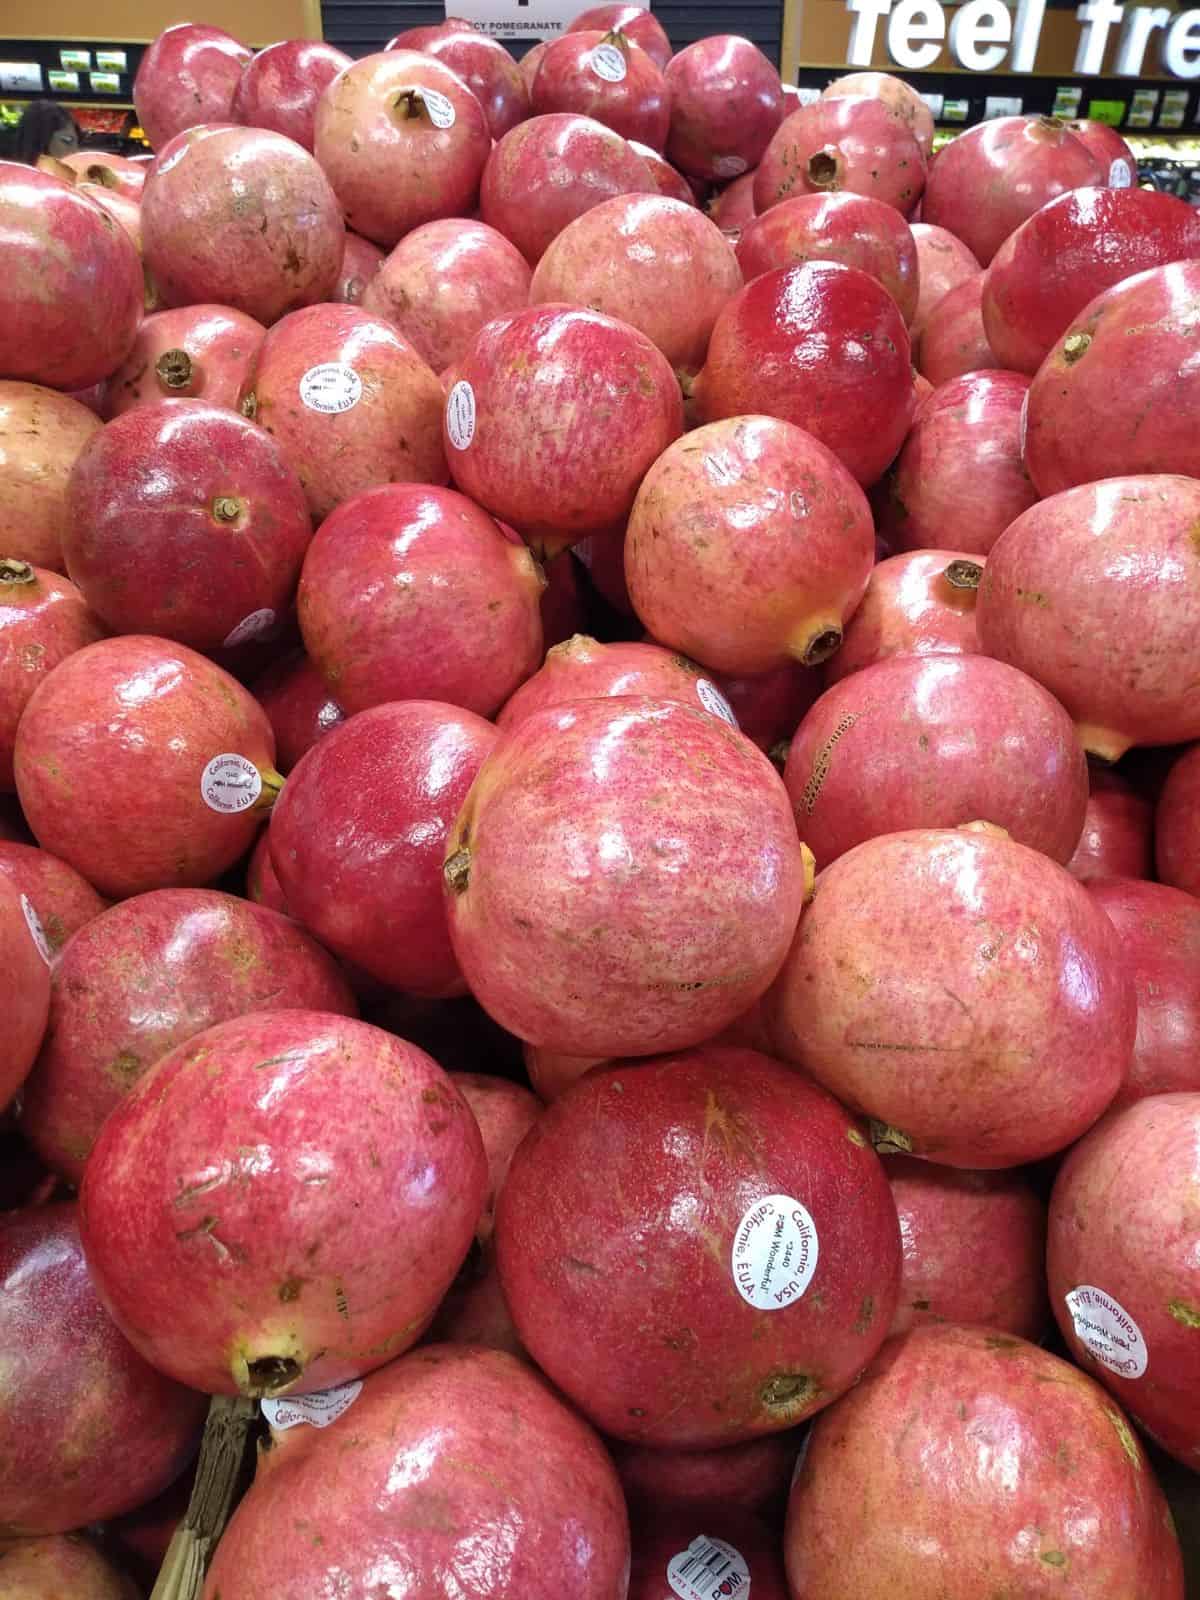 A pile of pomegranates at the grocery store.